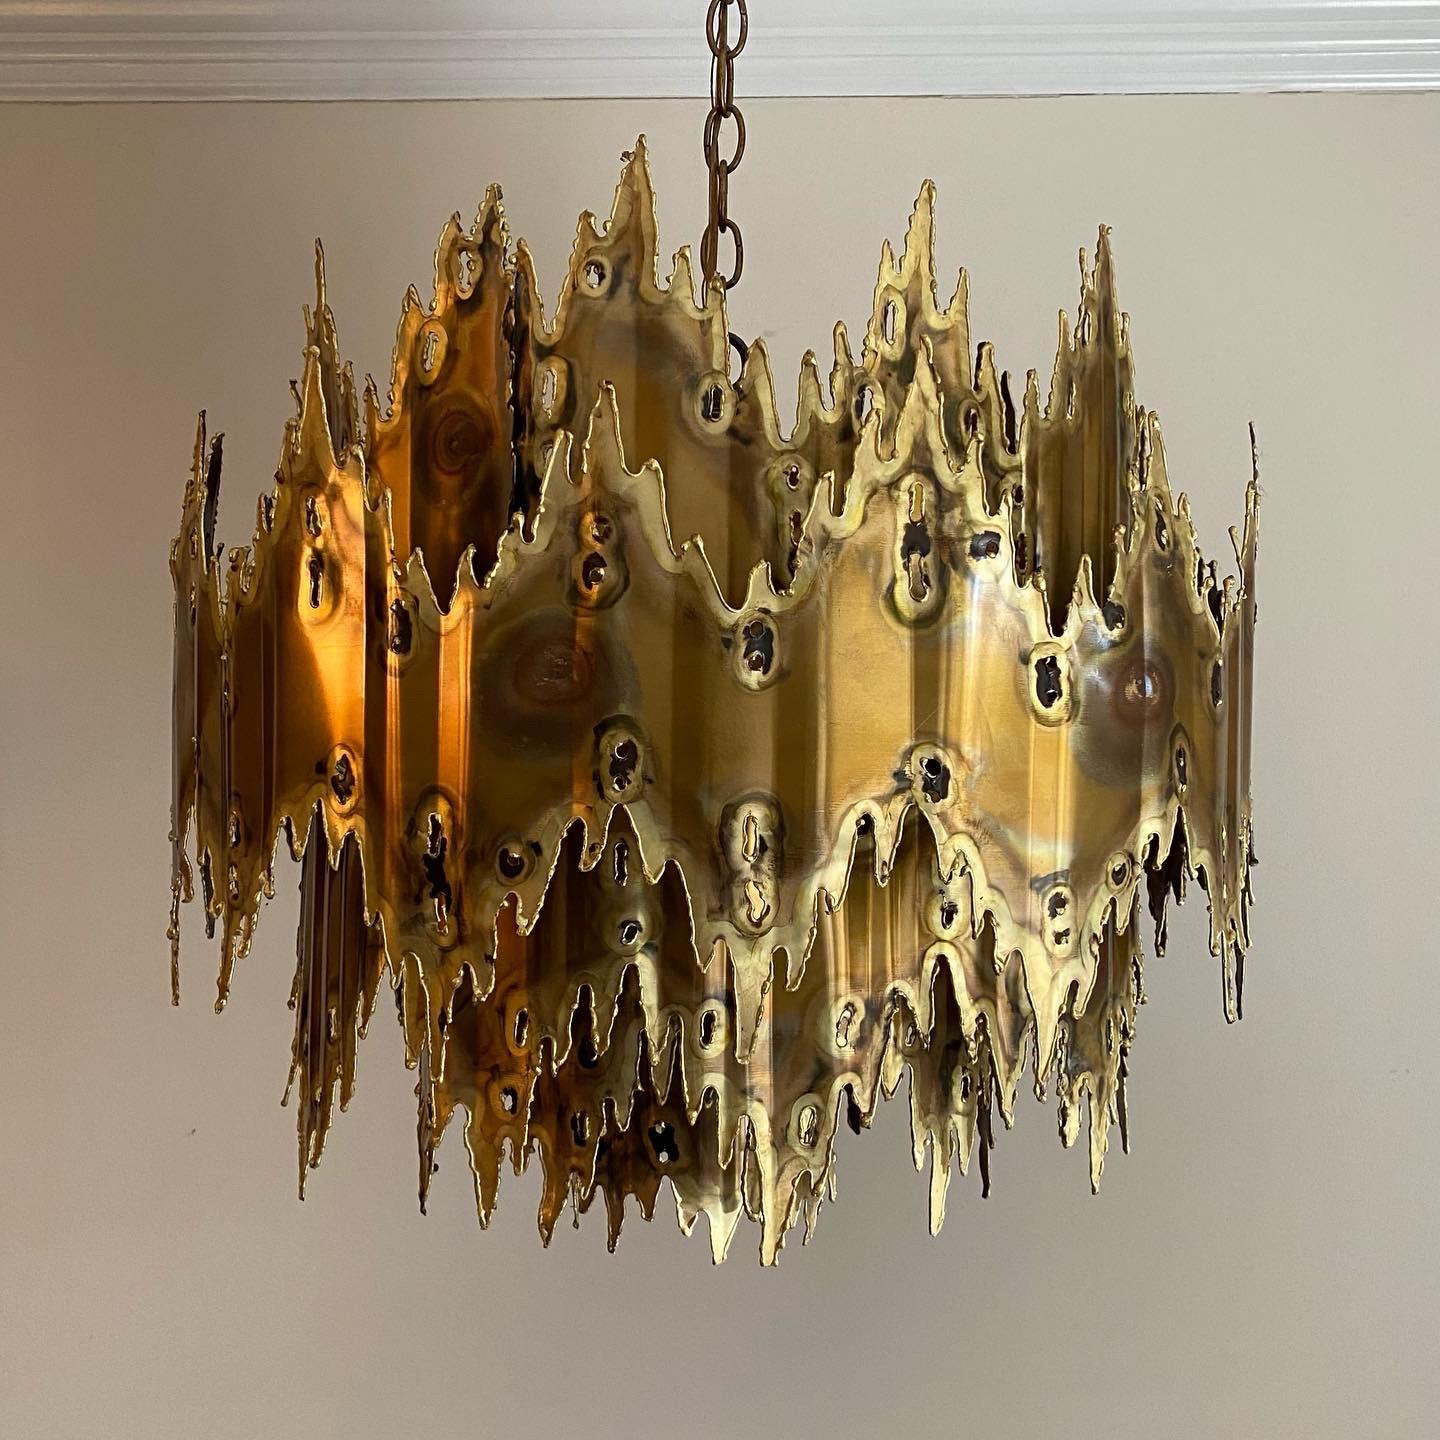 A fine example by Tom Greene in torch cut brass with six bulbs around and one pointing down. Retains the original canopy.